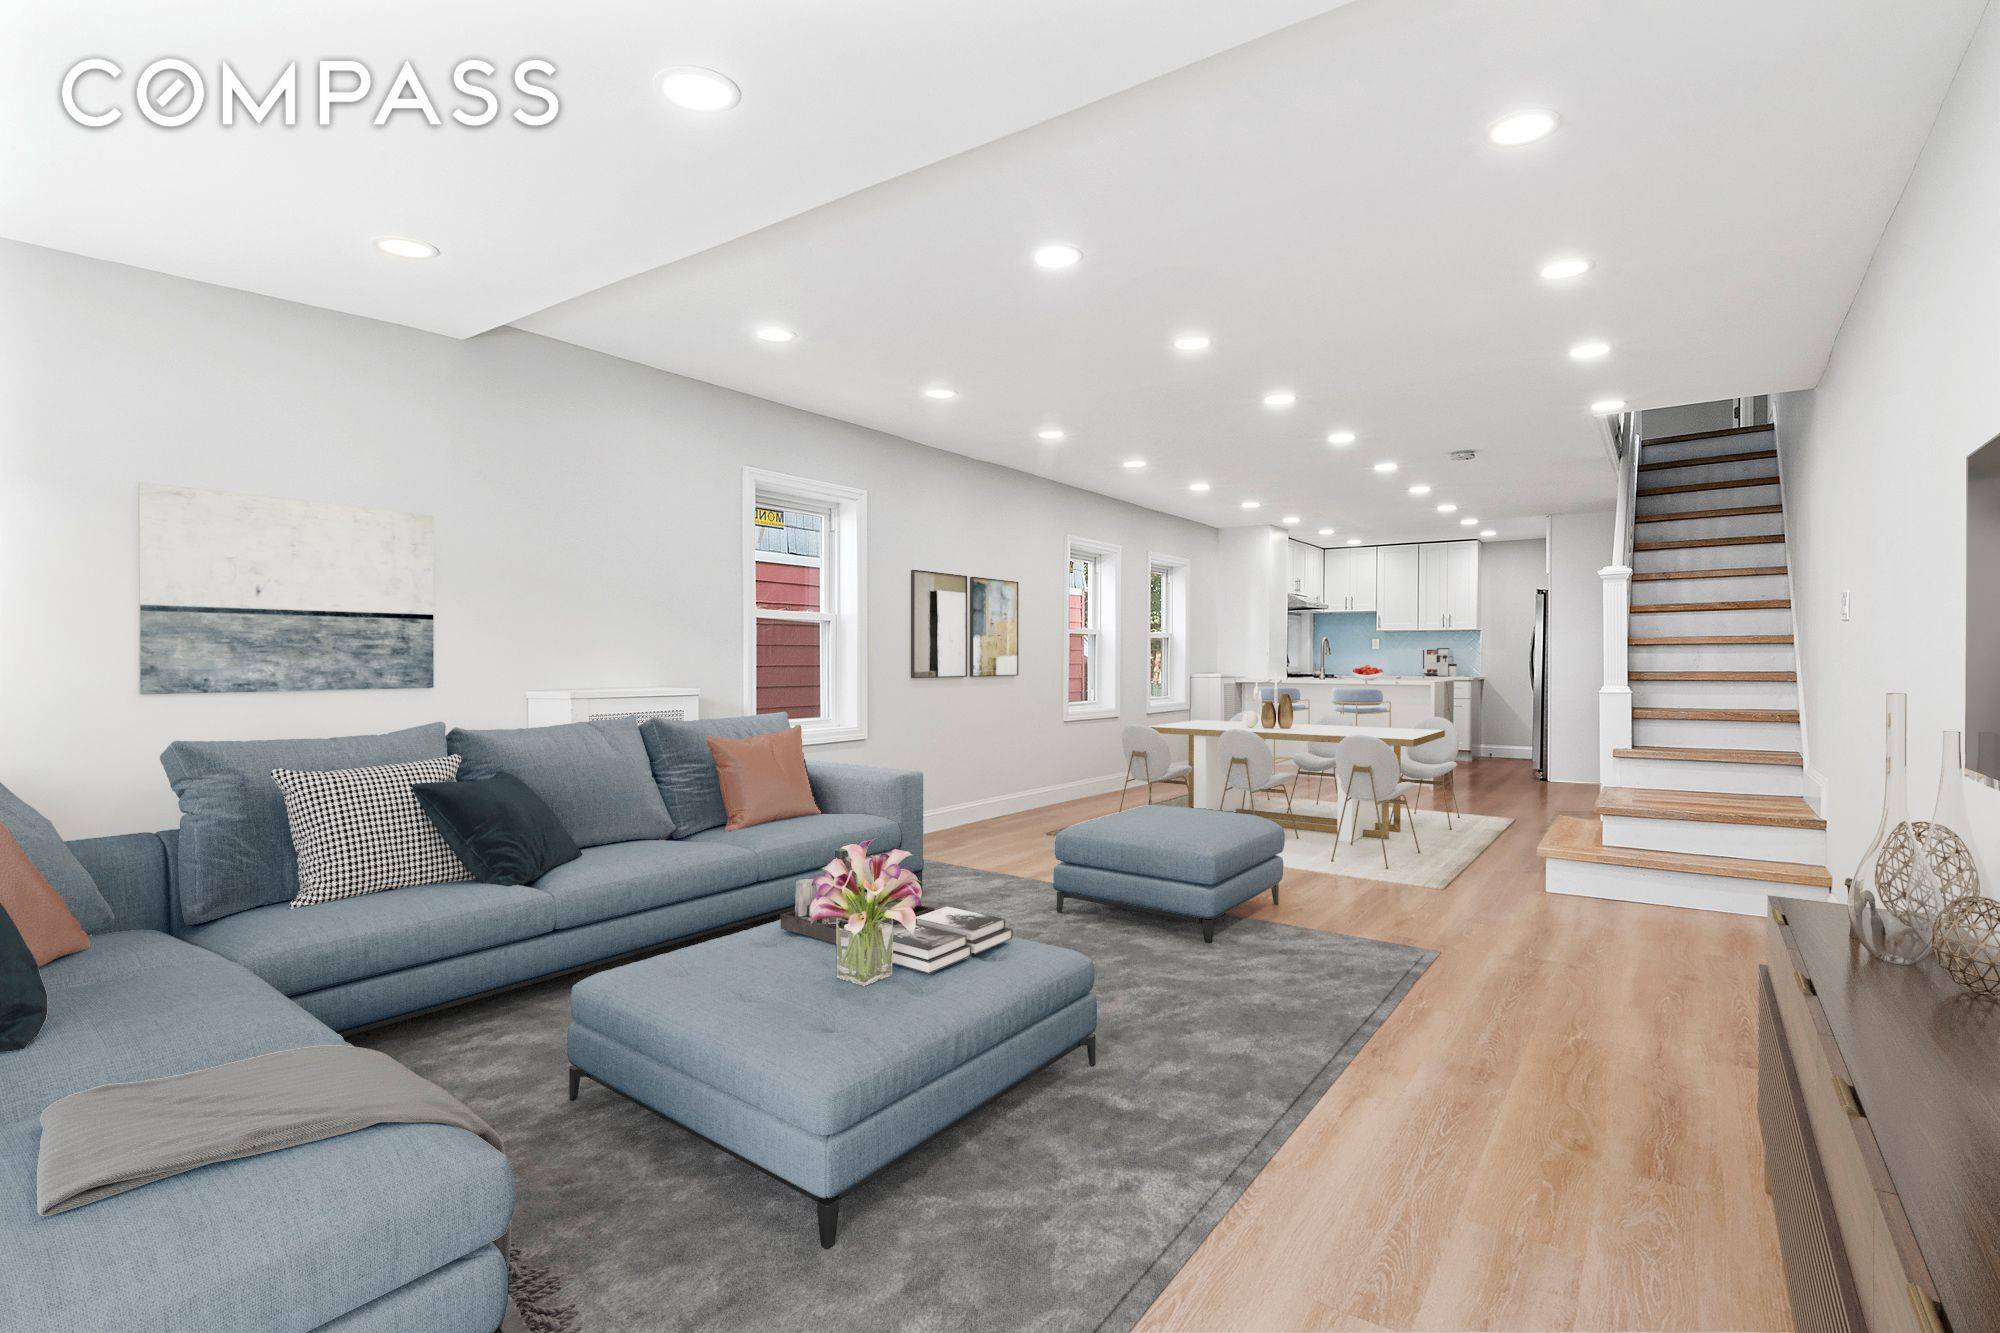 This lovely four bedroom, three bathroom detached home impresses with beautifully renovated interiors, a huge private outdoor space and an ideal location in Queens Village.